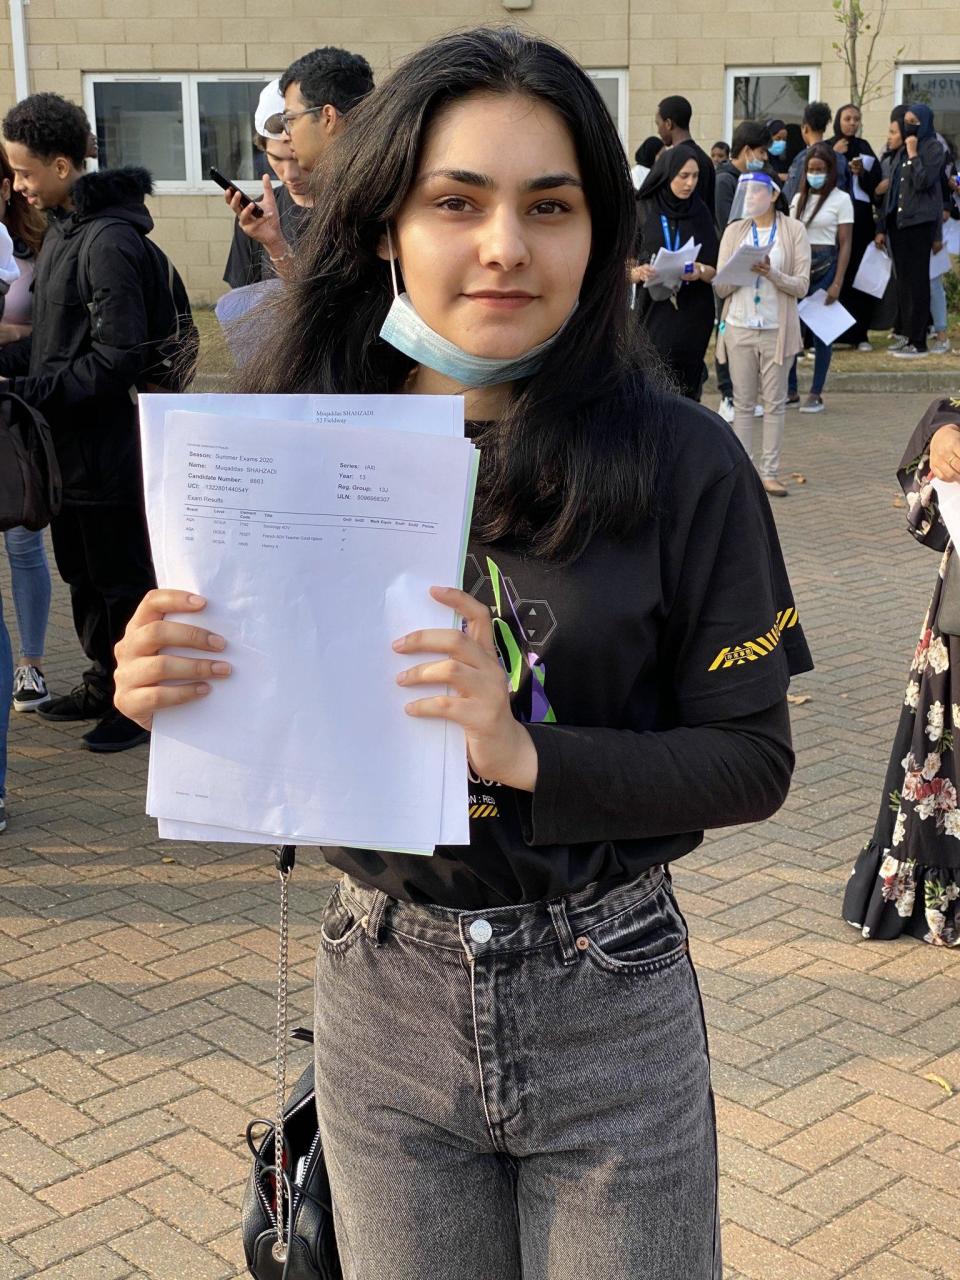 Muqaddas was among pupils celebrating as she confirmed her results to study law at Cambridge (Brampton Manor Academy/Twitter)